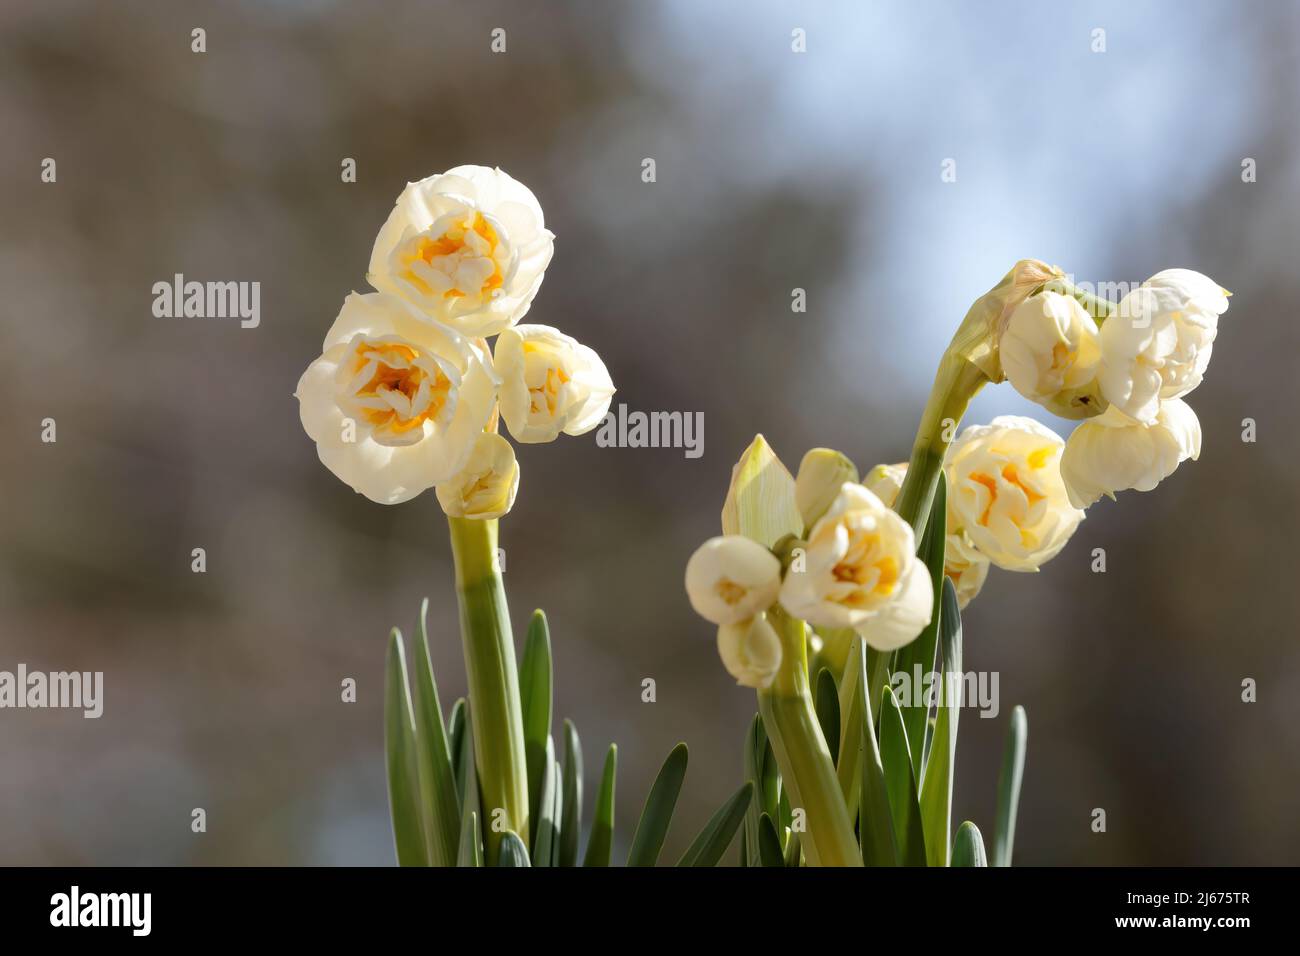 Narcissus Bridal crown blooming with white beautiful flowers Stock Photo